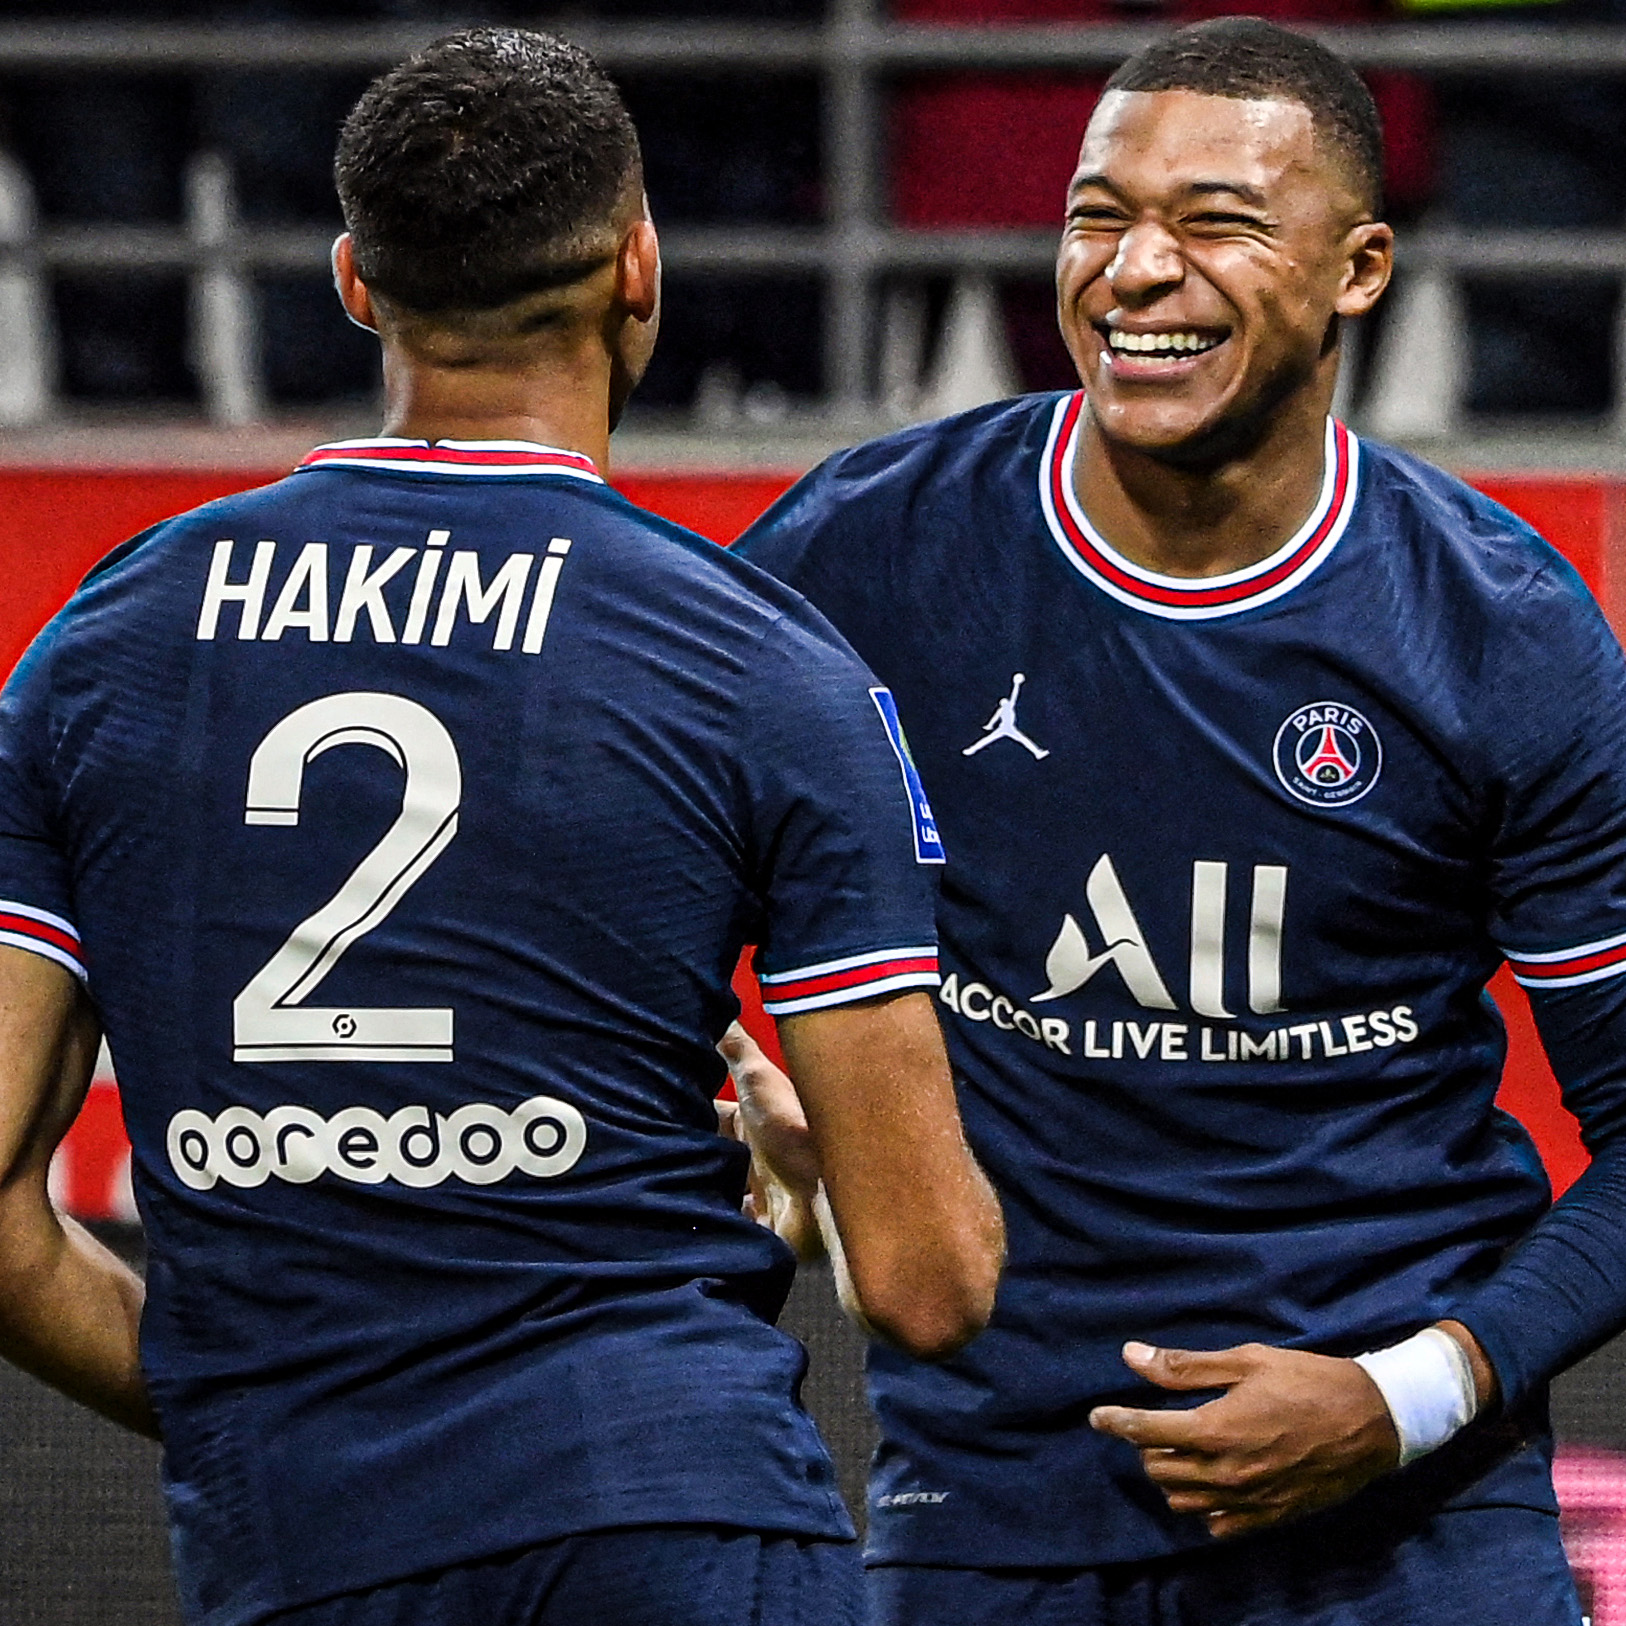 Mbappe and Hakimi have often times been criticized for their selfish link-up play for PSG